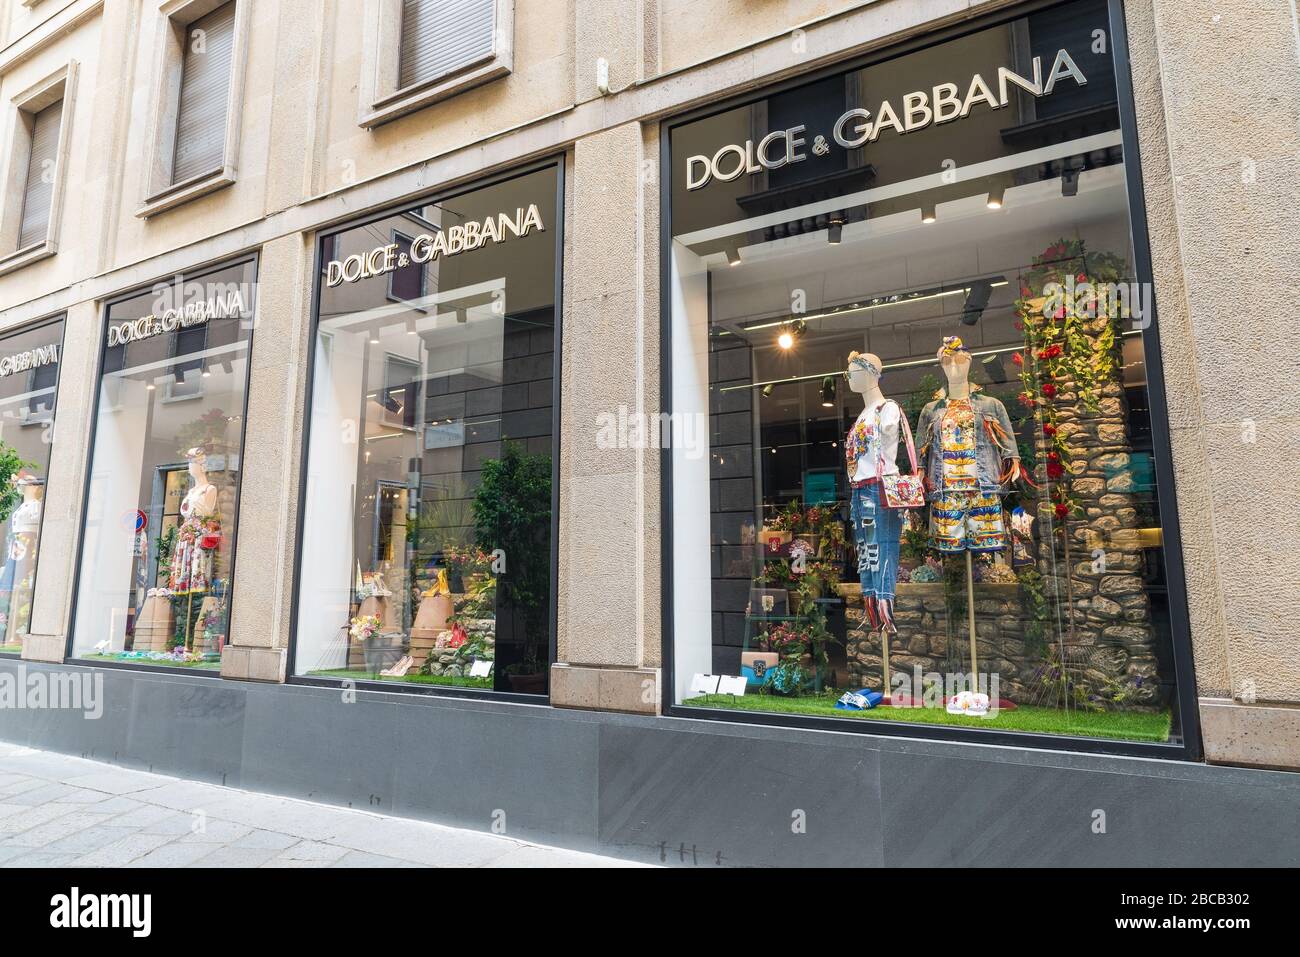 dolce gabbana outlet store